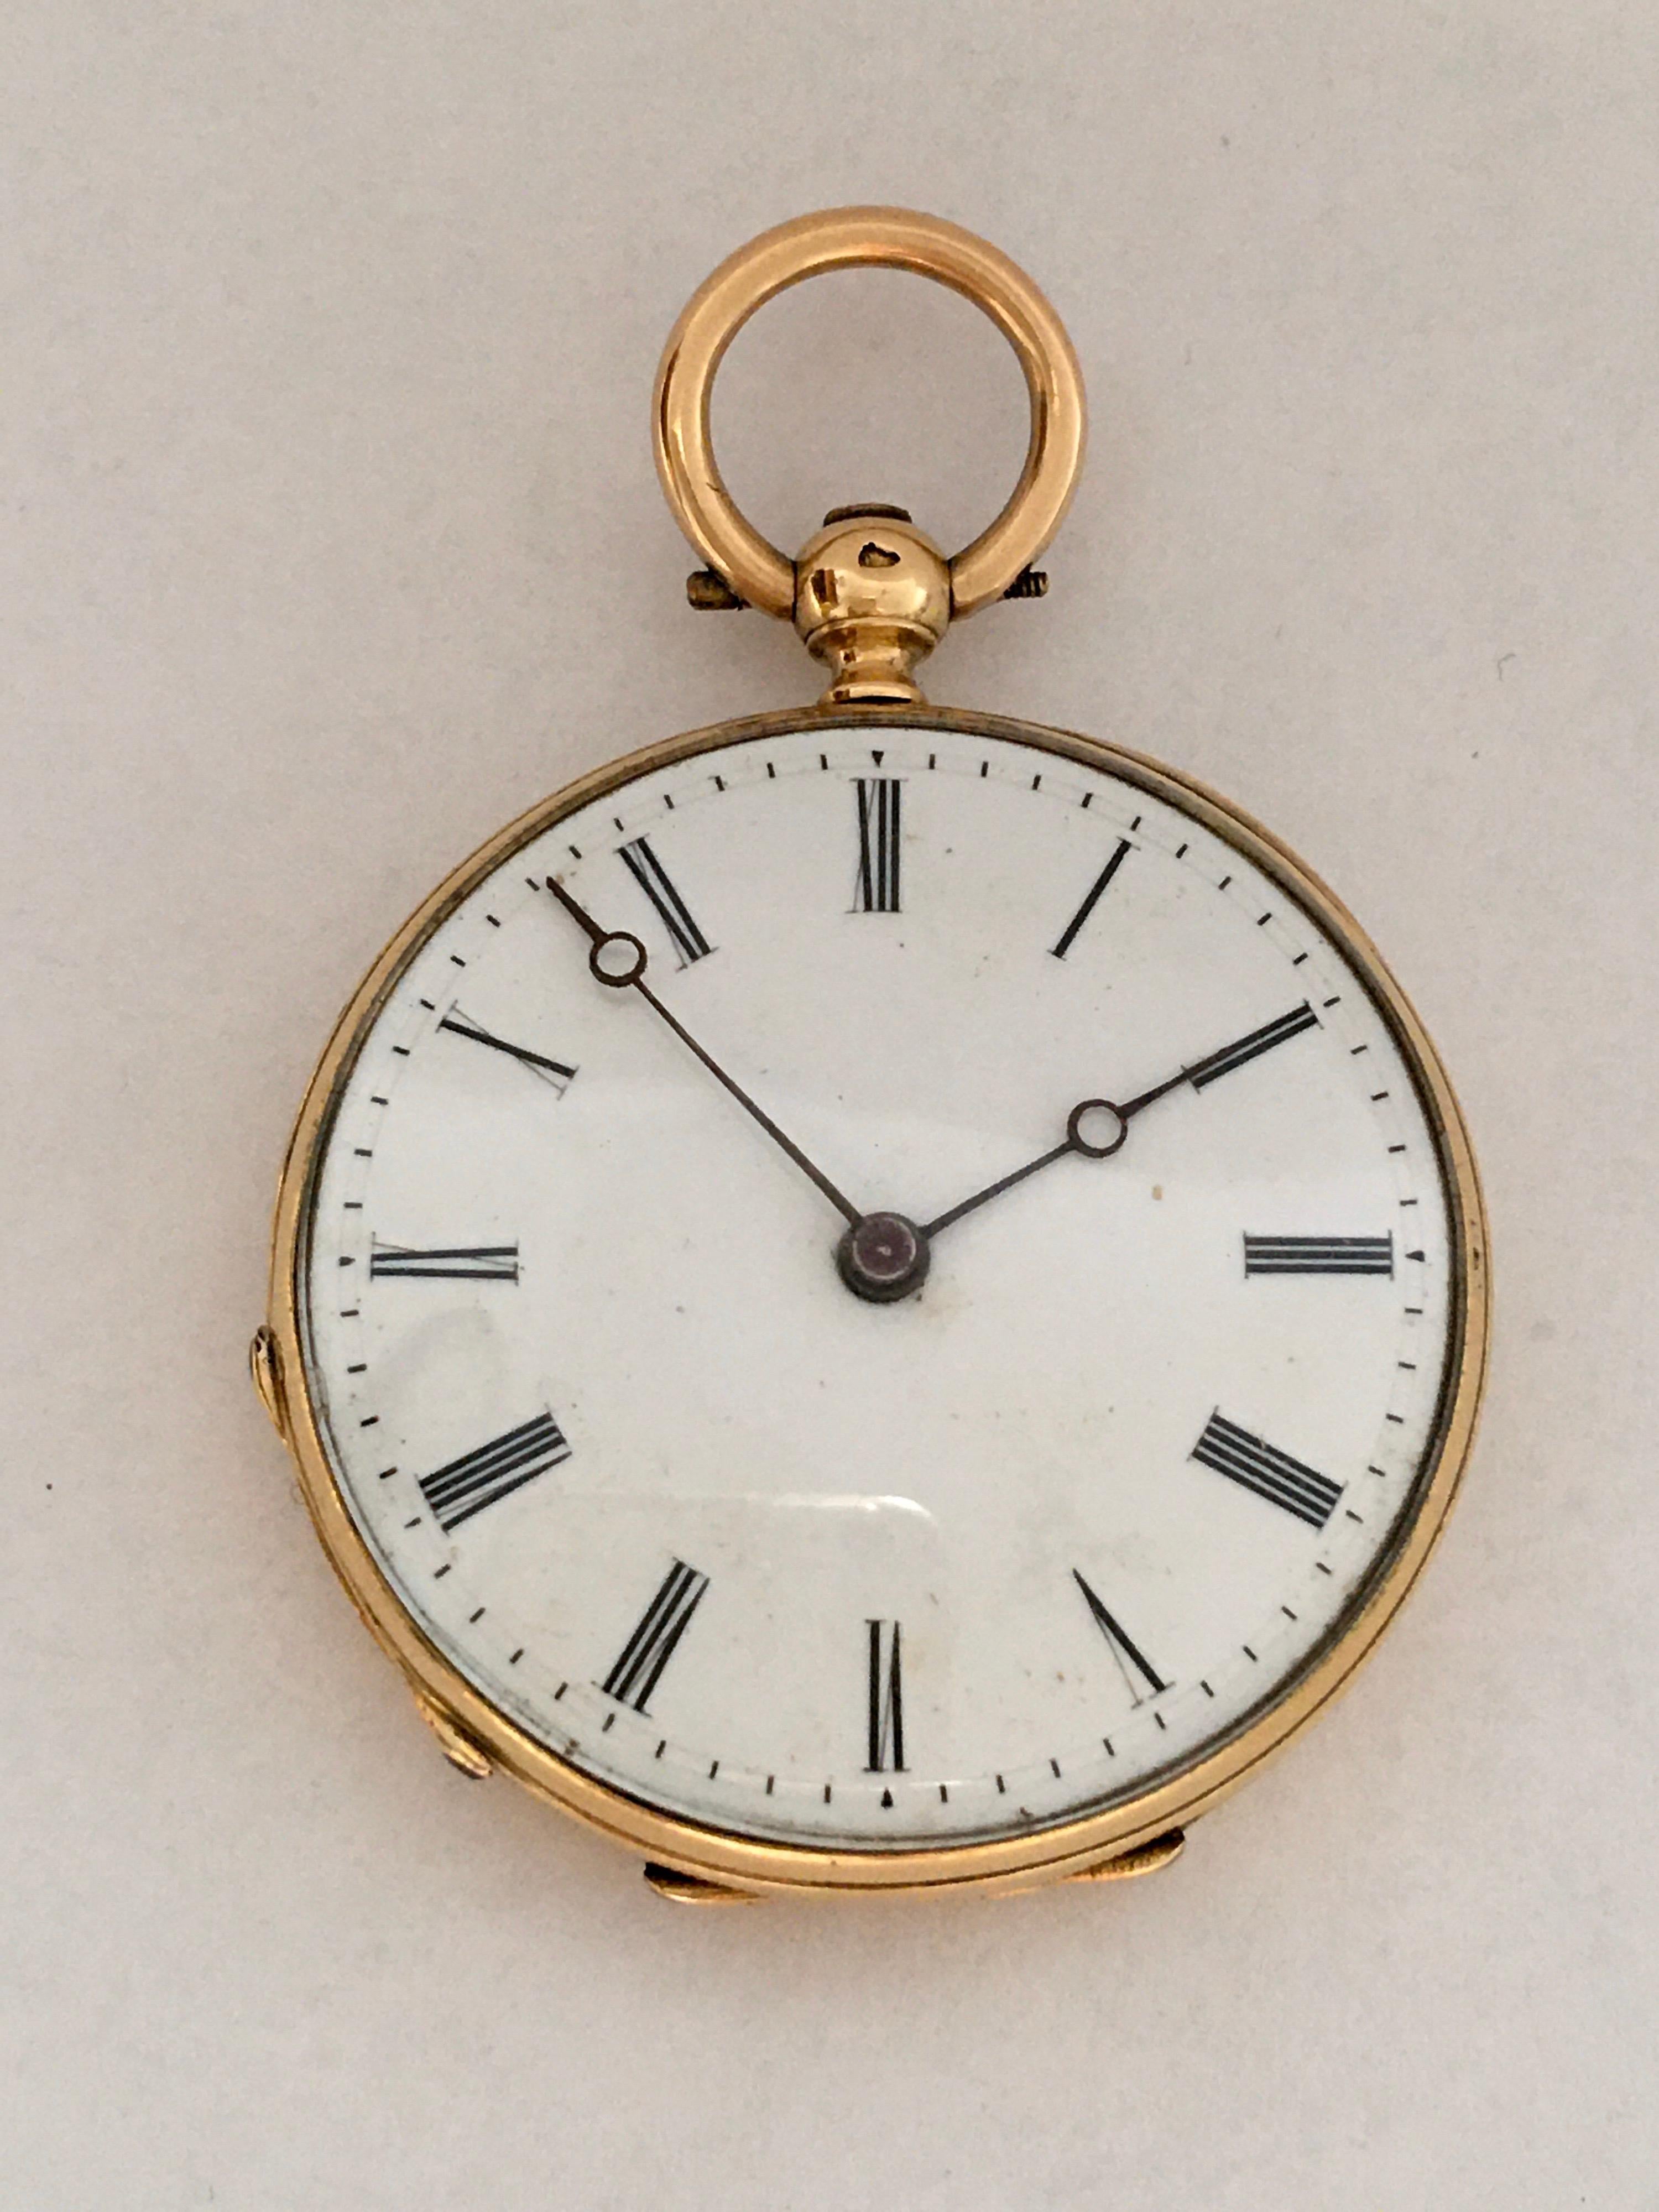 This stunning ladies gold pocket watch is in good working condition and is ticking well. 